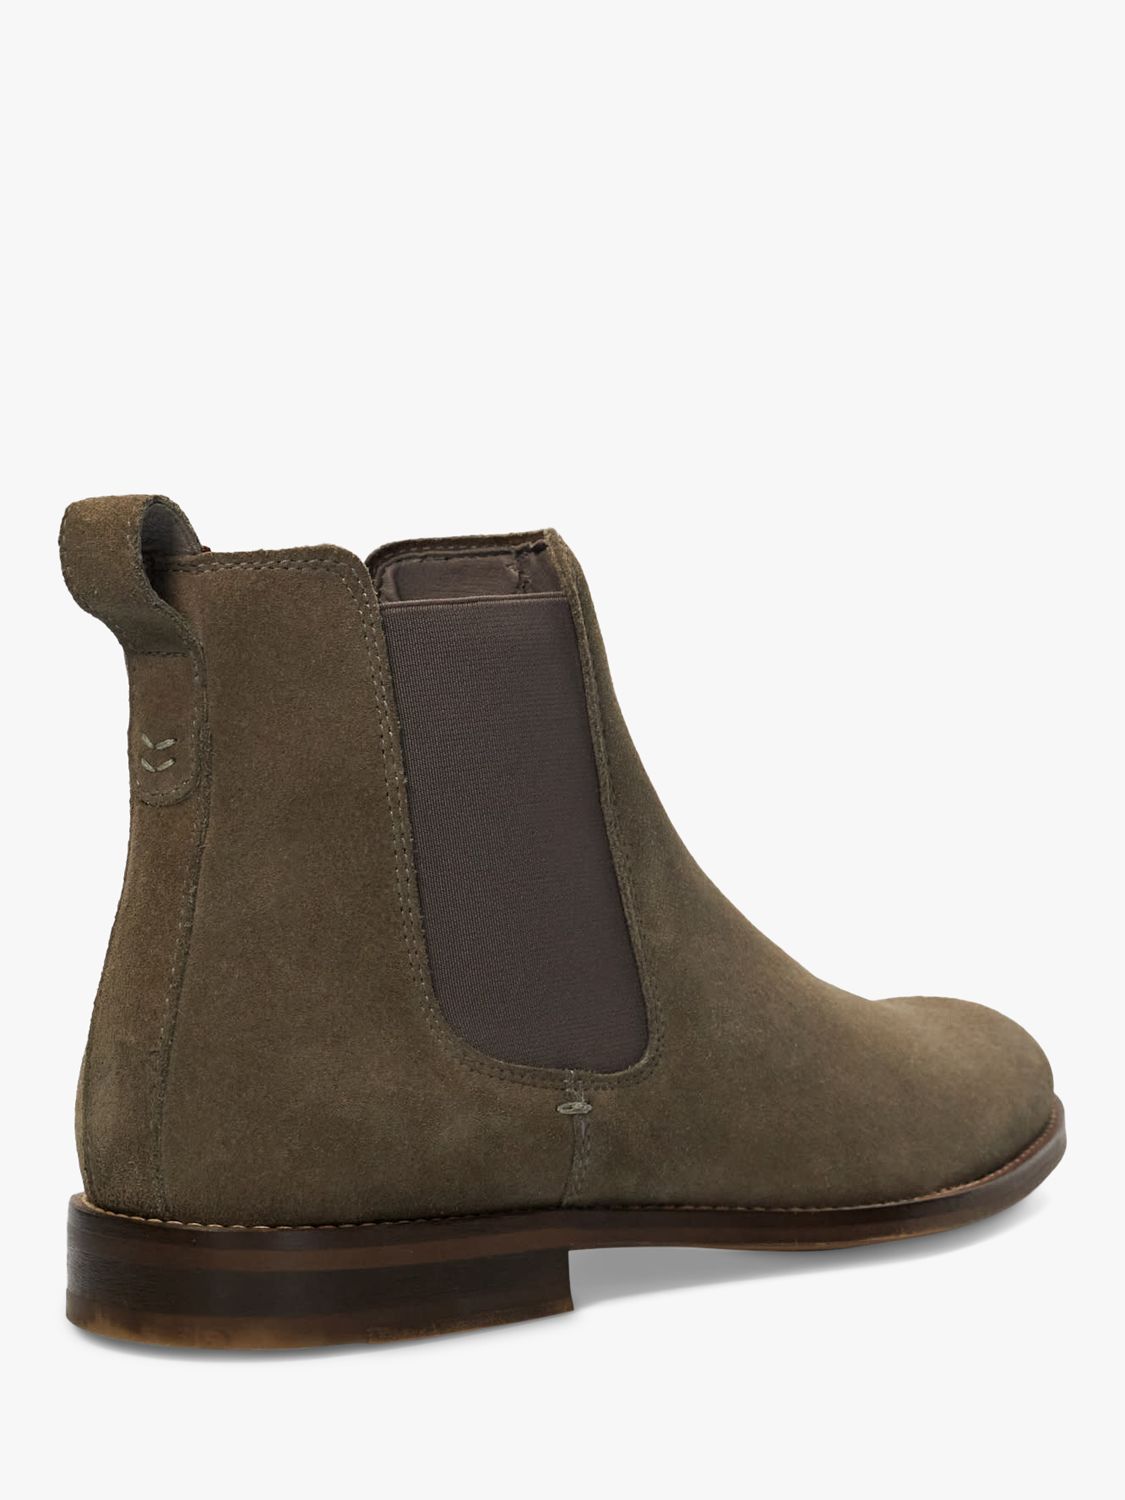 Buy Dune Collective Suede Chelsea Boots Online at johnlewis.com